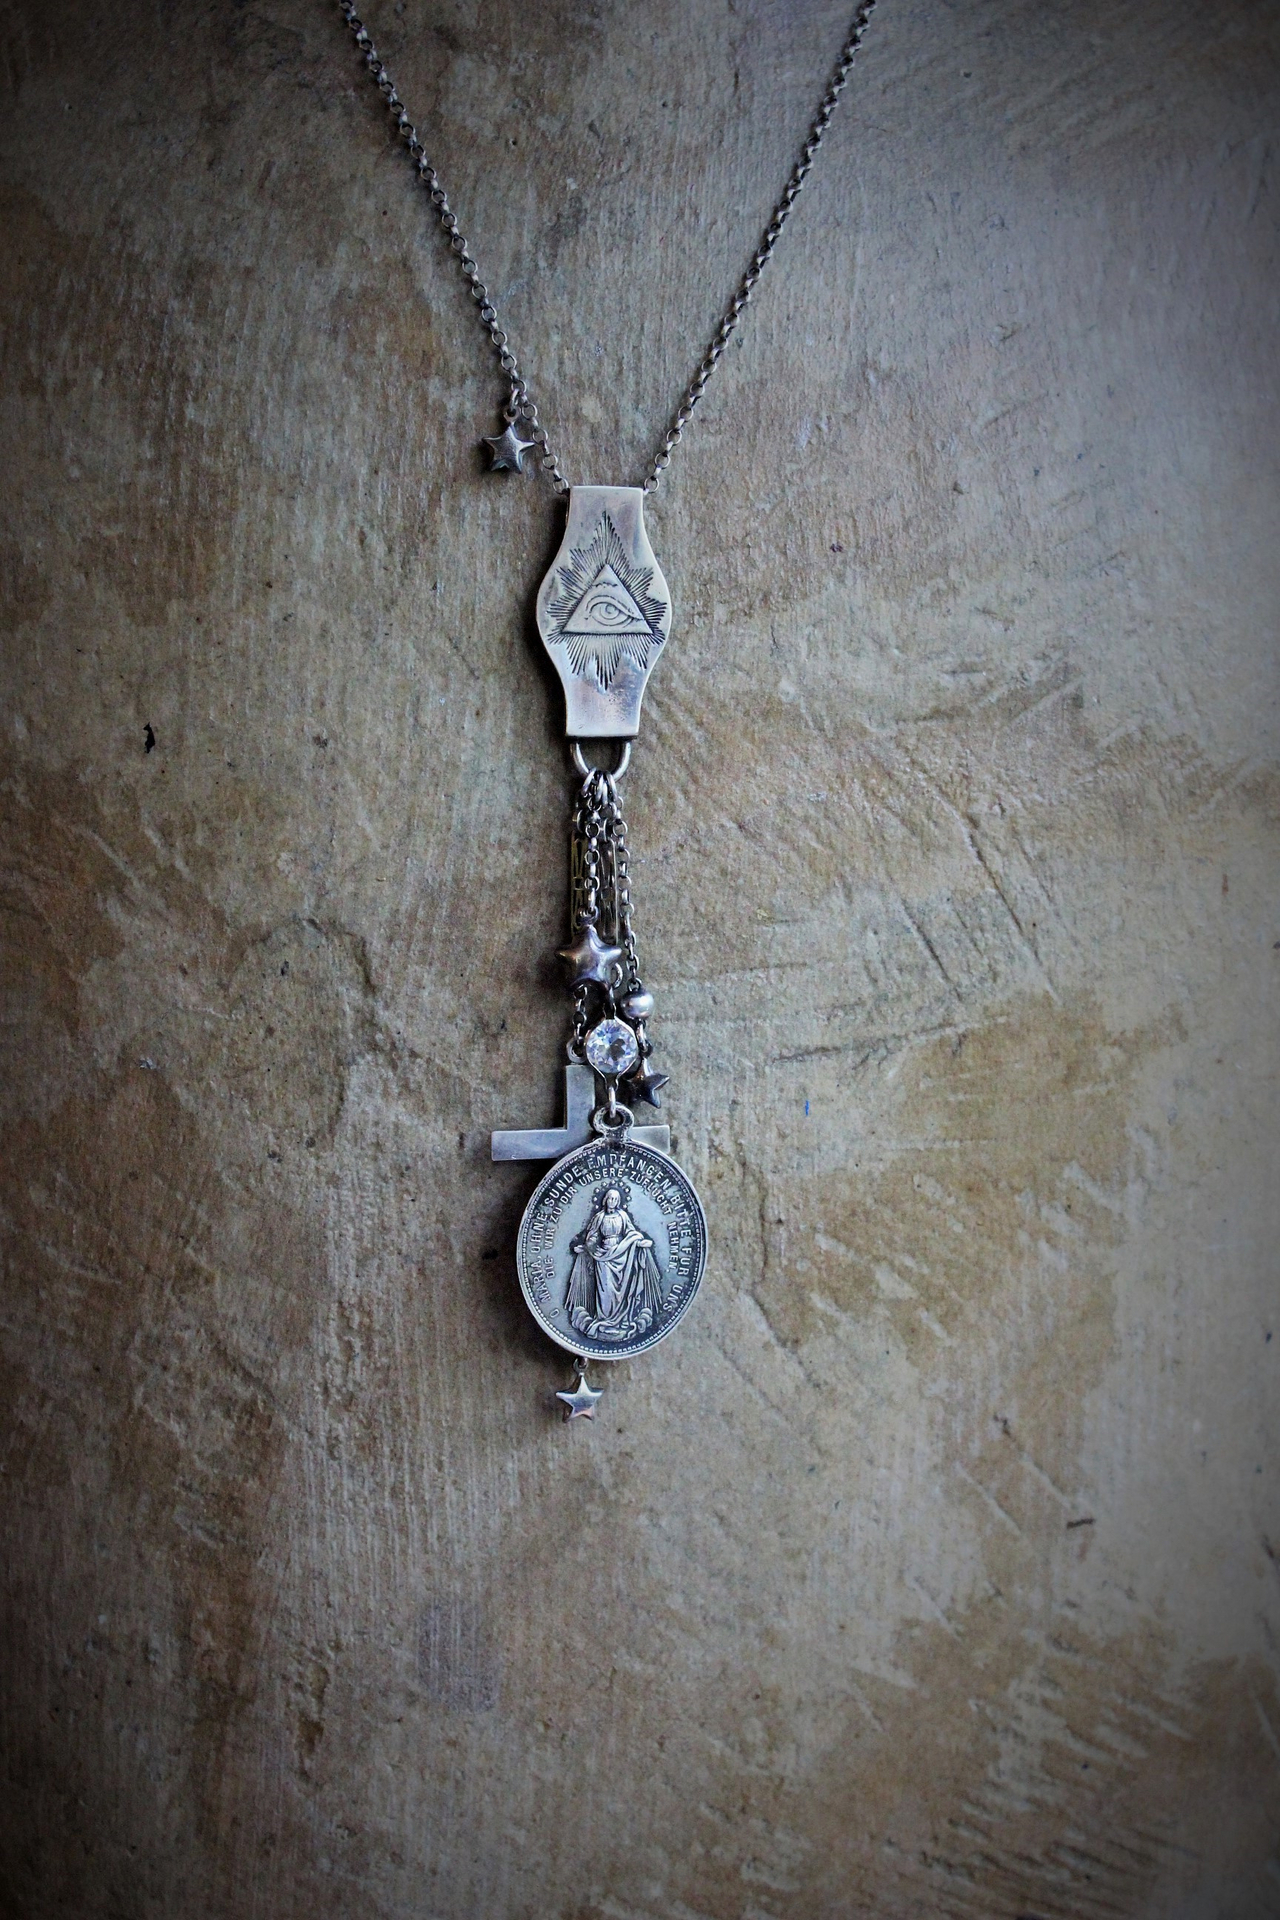 NEW! Amazing Antique Sterling Eye Of God Necklace with Antique Marian Medal,Antique Sterling Puffy Stars,Sterling Rolo Chain & More!